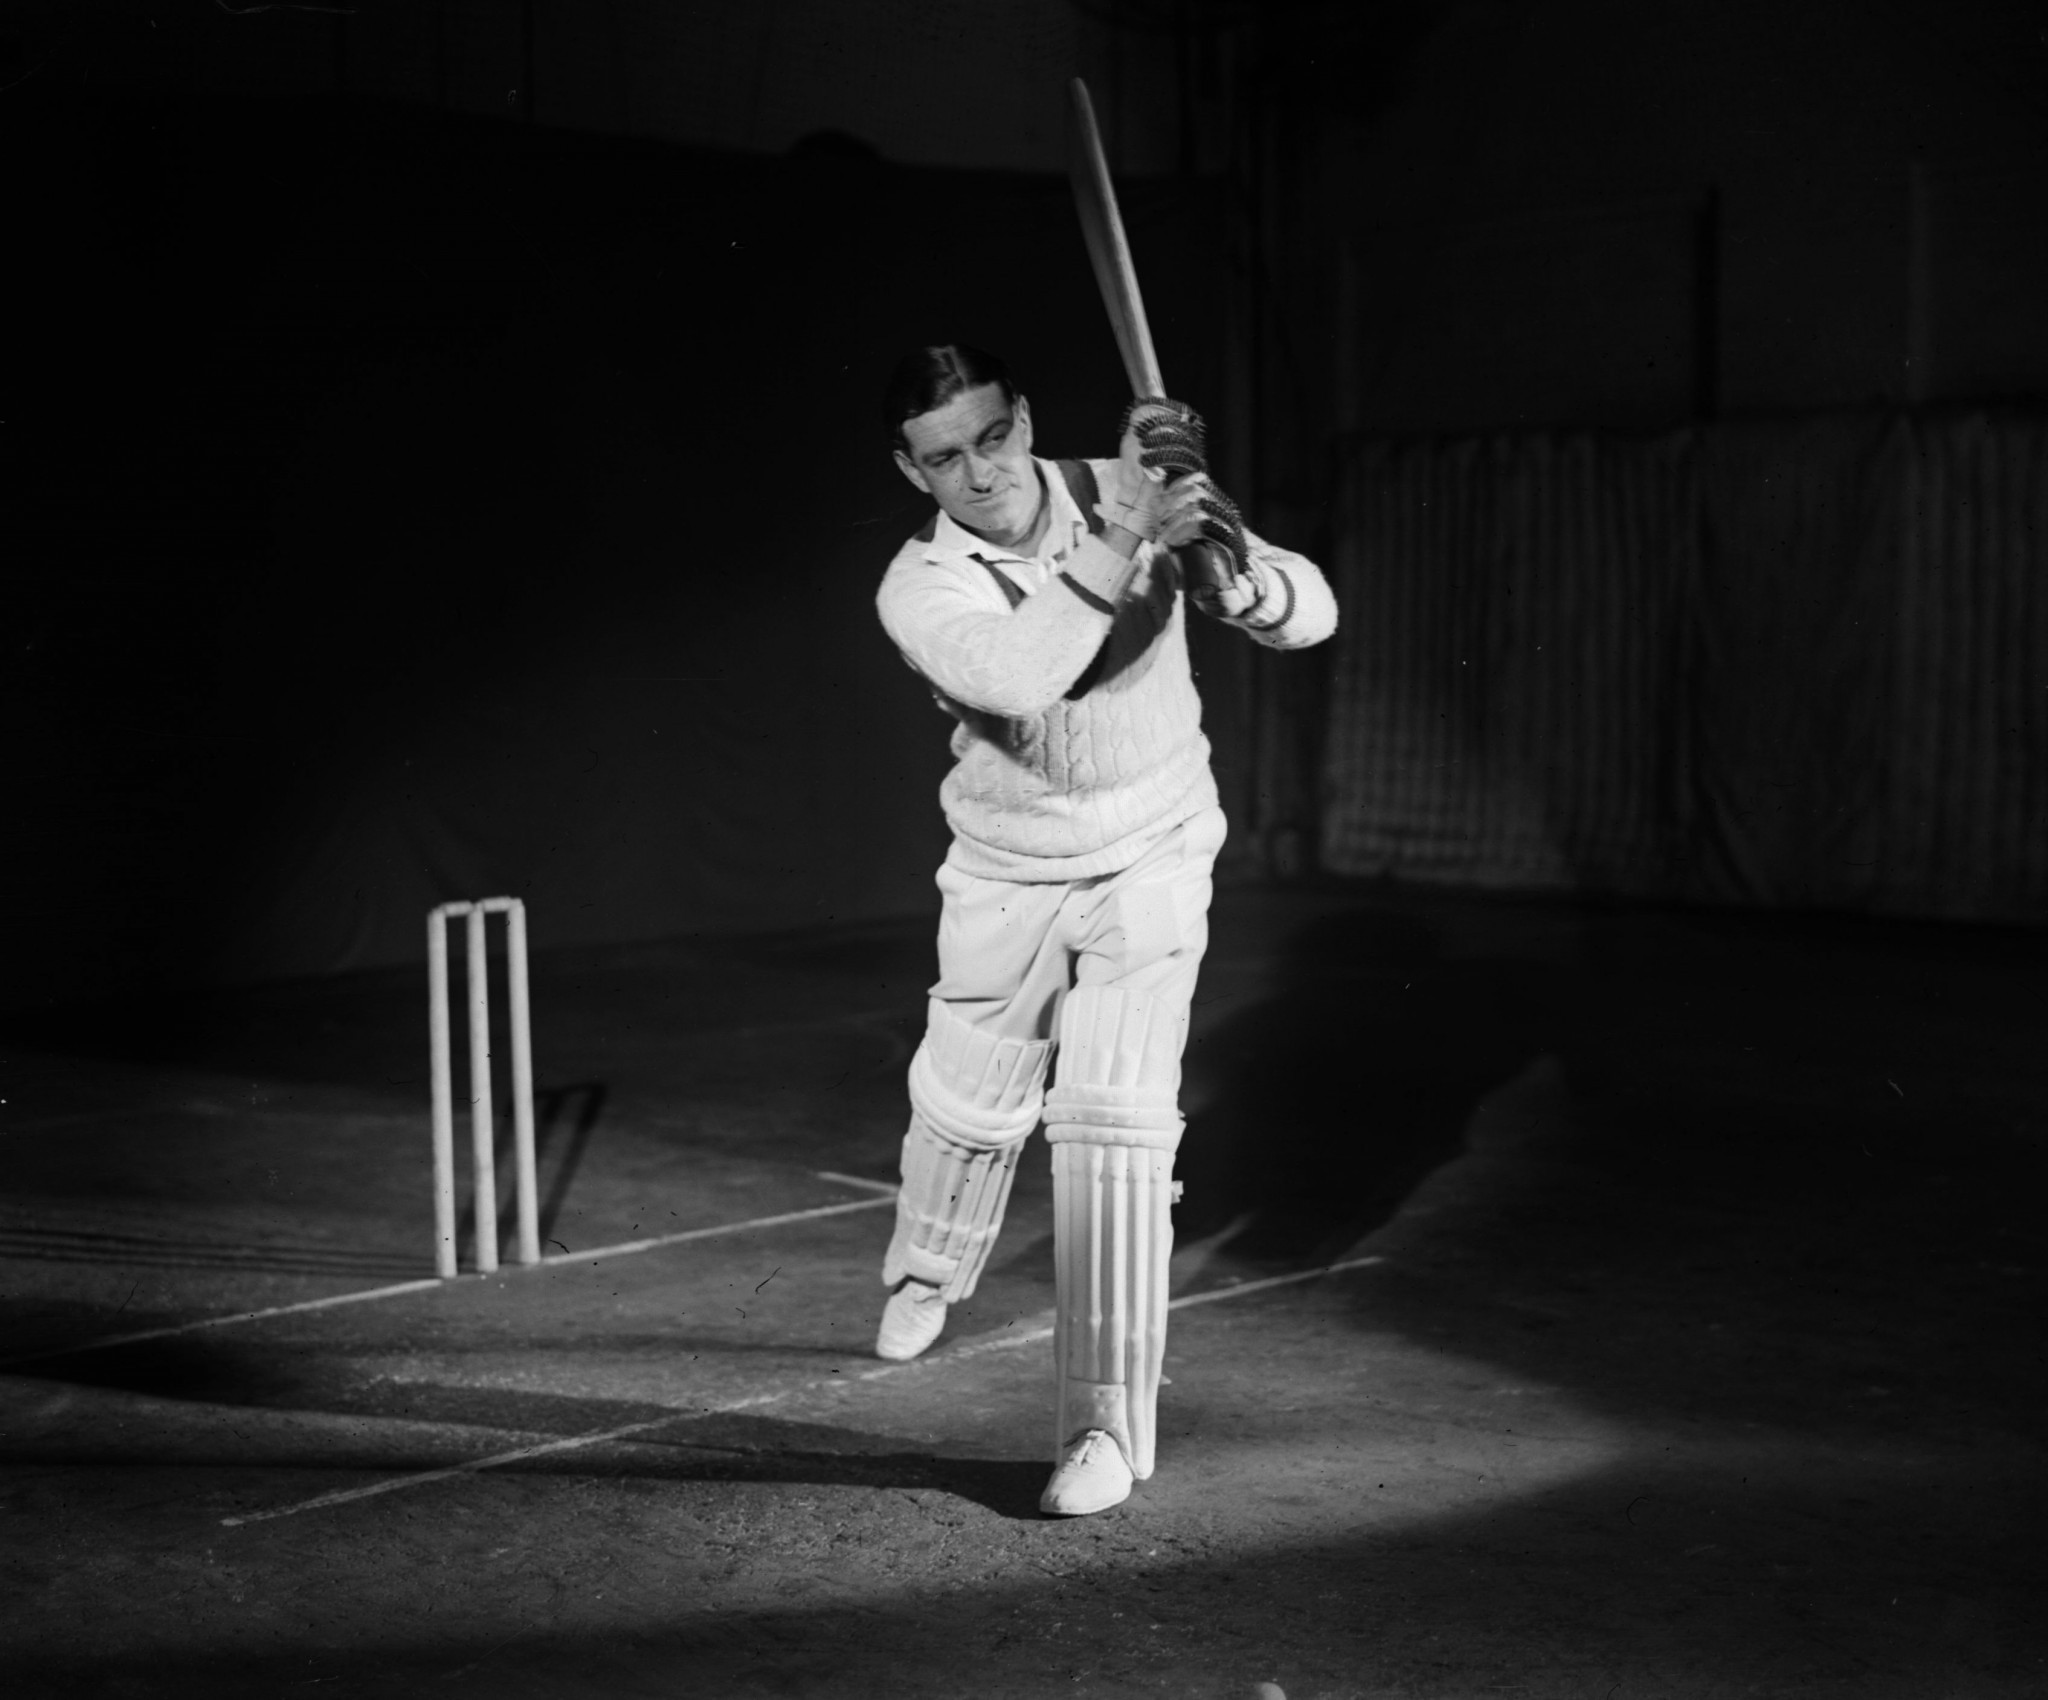 Walter 'Wally' Hammond, captain of England and Worcestershire, gives a demonstration of his stylish batting technique in 1930 ©Getty Images